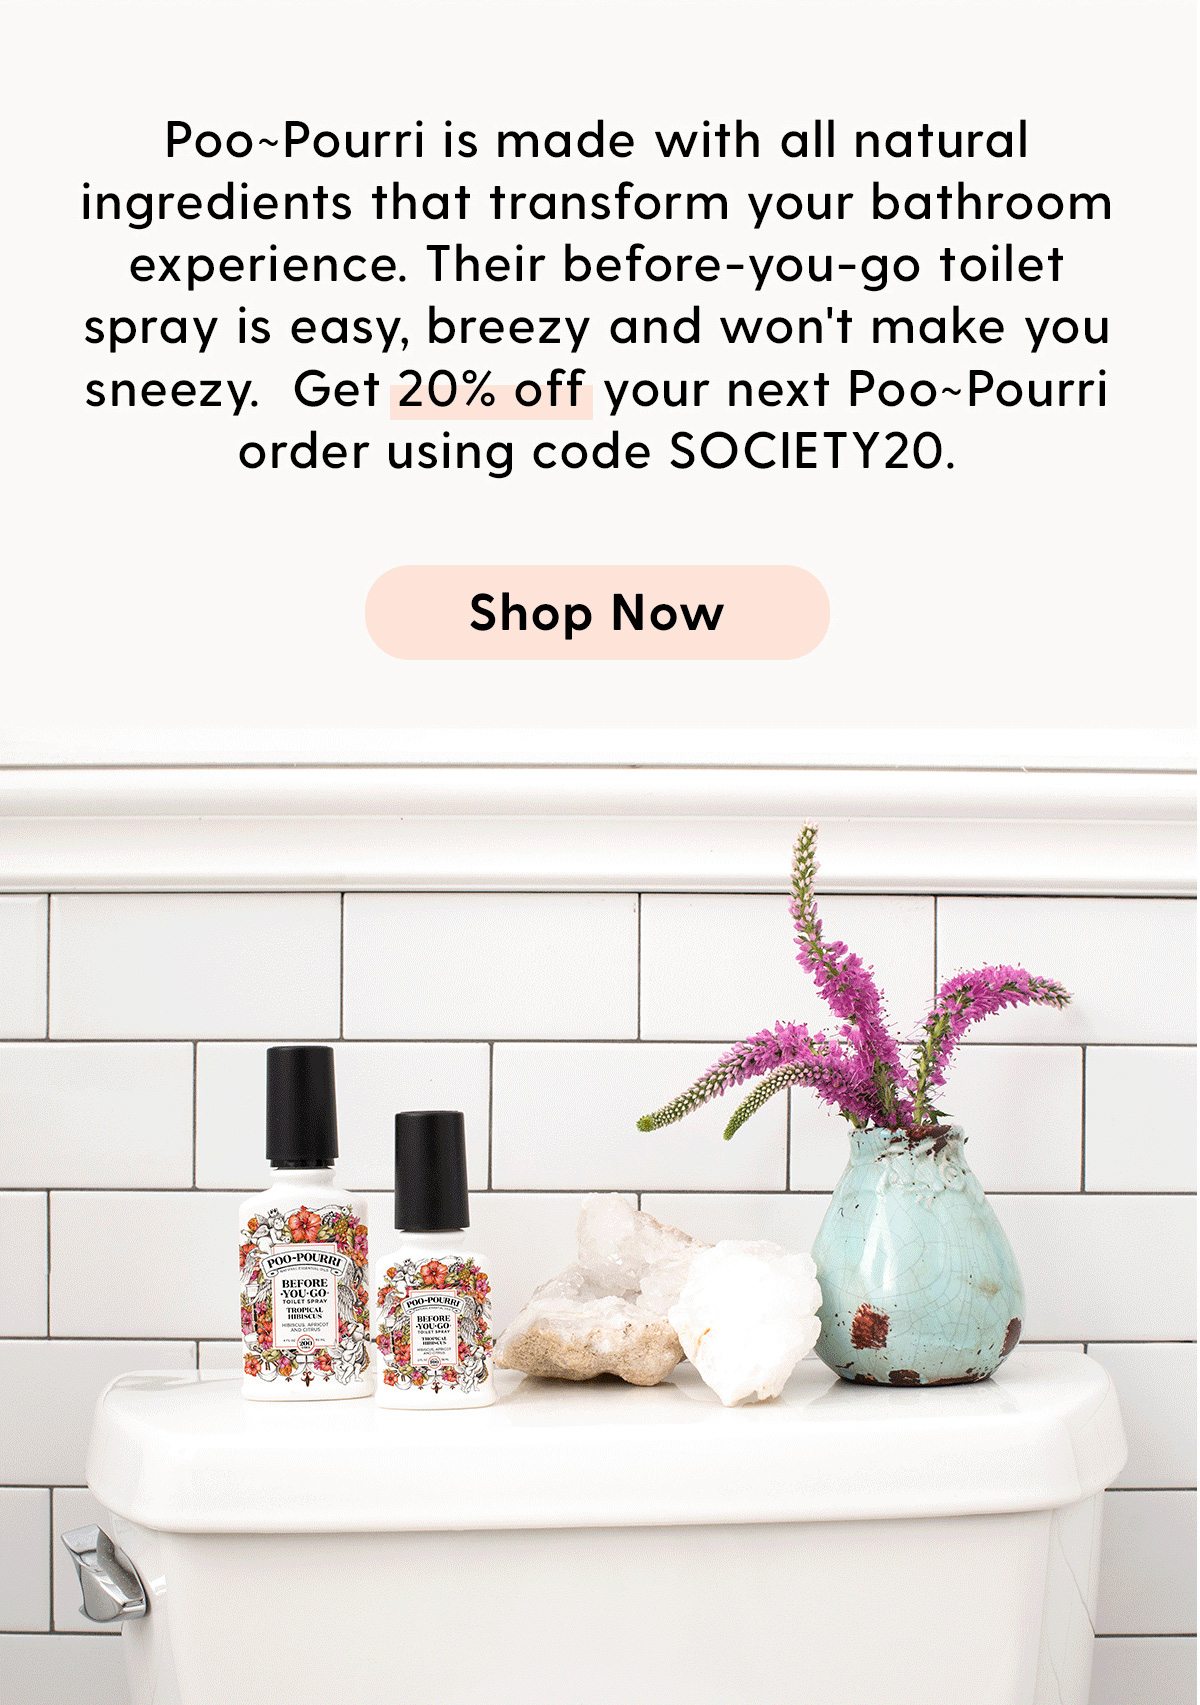 Poo~Pourri is made with all natural ingredients that transform your bathroom experience. Their before-you-go toilet spray is easy, breezy and won't make you sneezy. Get 20% off your next Poo~Pourri order using code SOCIETY20. Shop Now